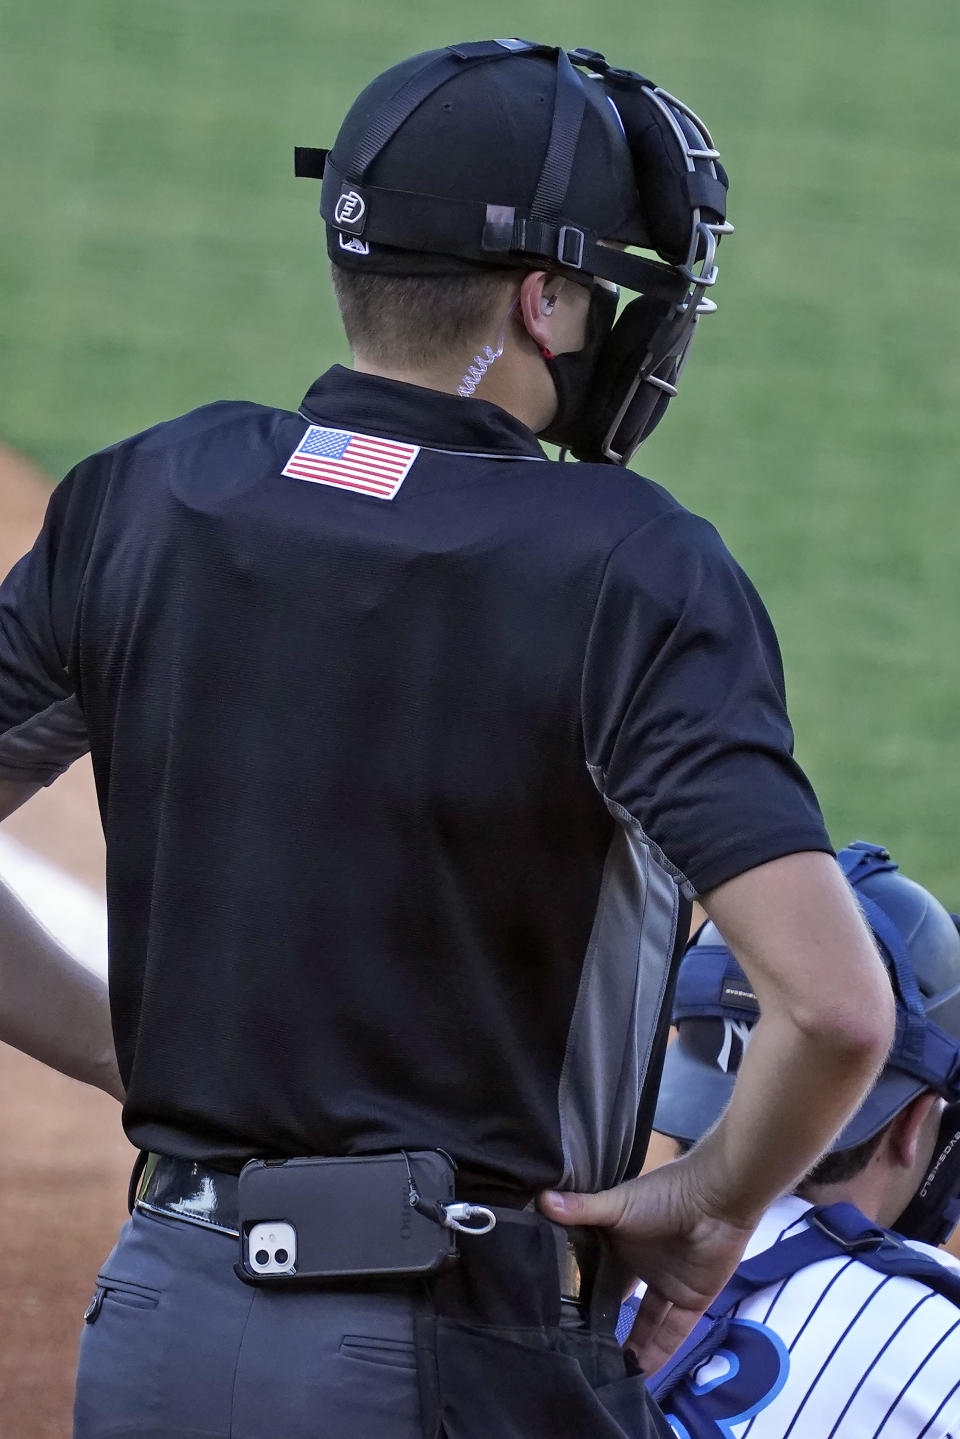 Home plate umpire Kaleb Devier wears an earpiece and a battery pack during a Low A Southeast League baseball game between the Dunedin Blue Jays and the Tampa Tarpons at George M. Steinbrenner Field Tuesday, May 4, 2021, in Tampa, Fla. The game is one of the first in the league to use automatic balls and strike calls. (AP Photo/Chris O'Meara)